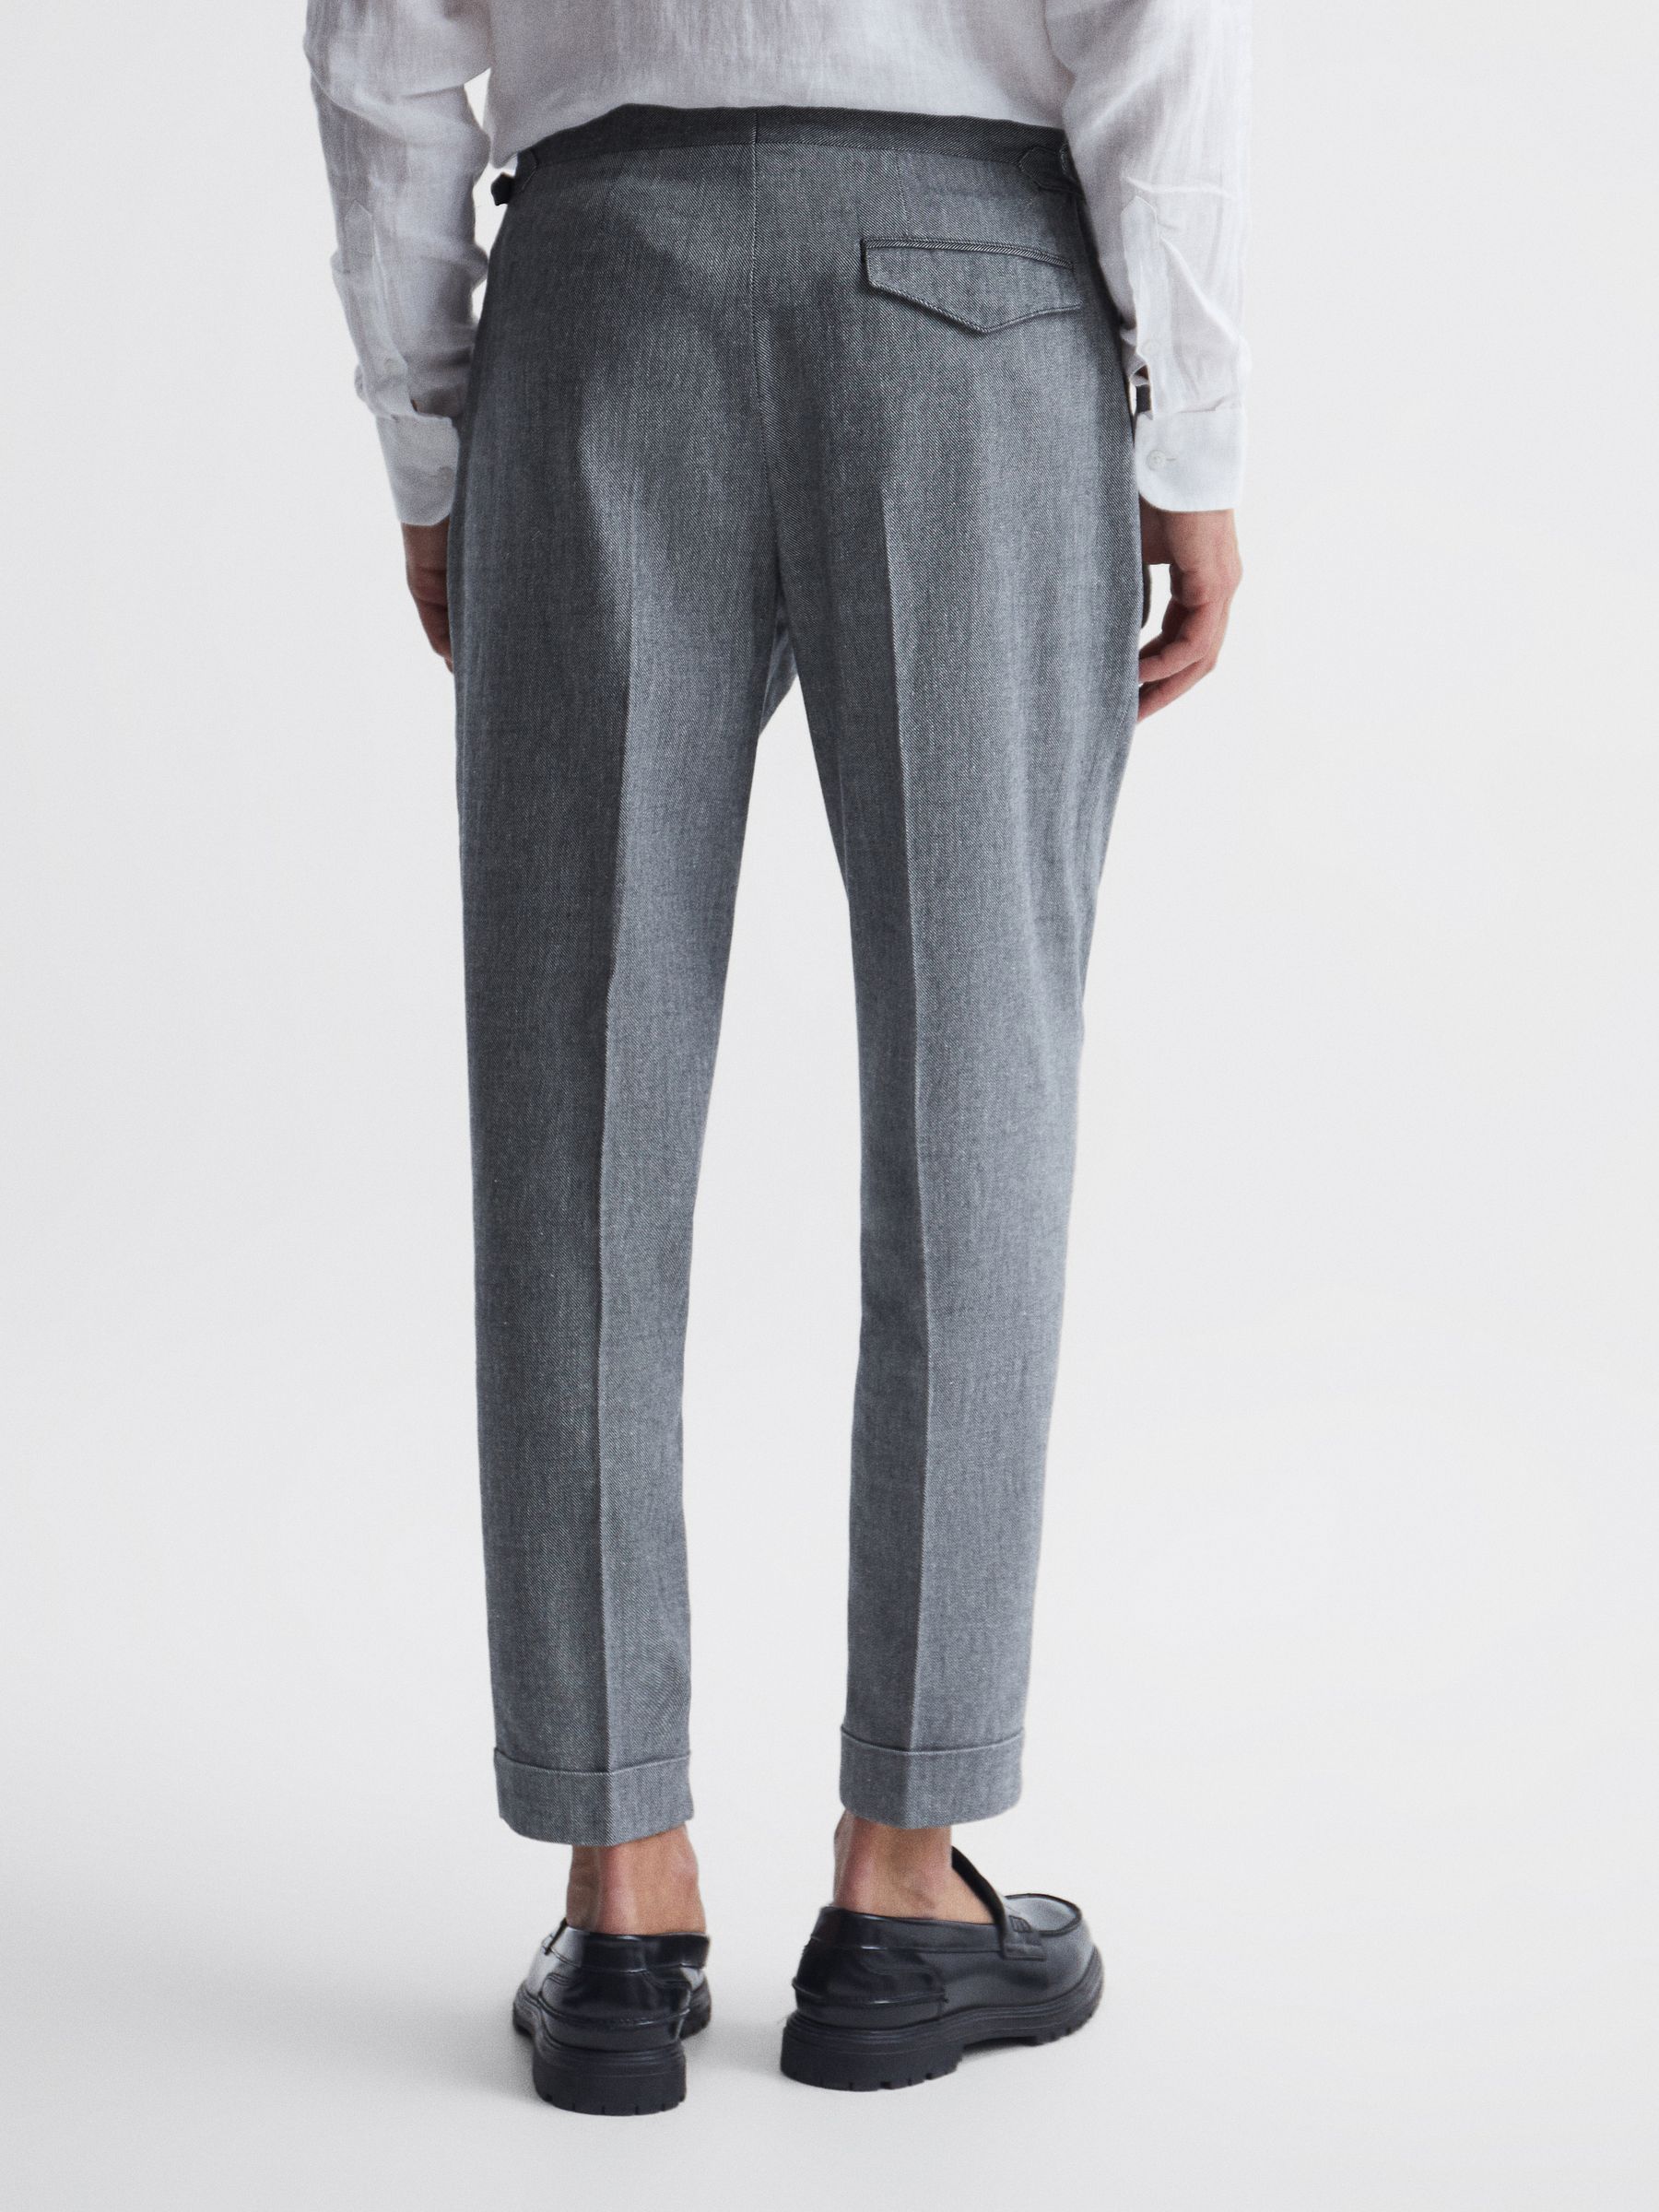 Reiss Map Tapered Side Adjuster Trousers | REISS USA